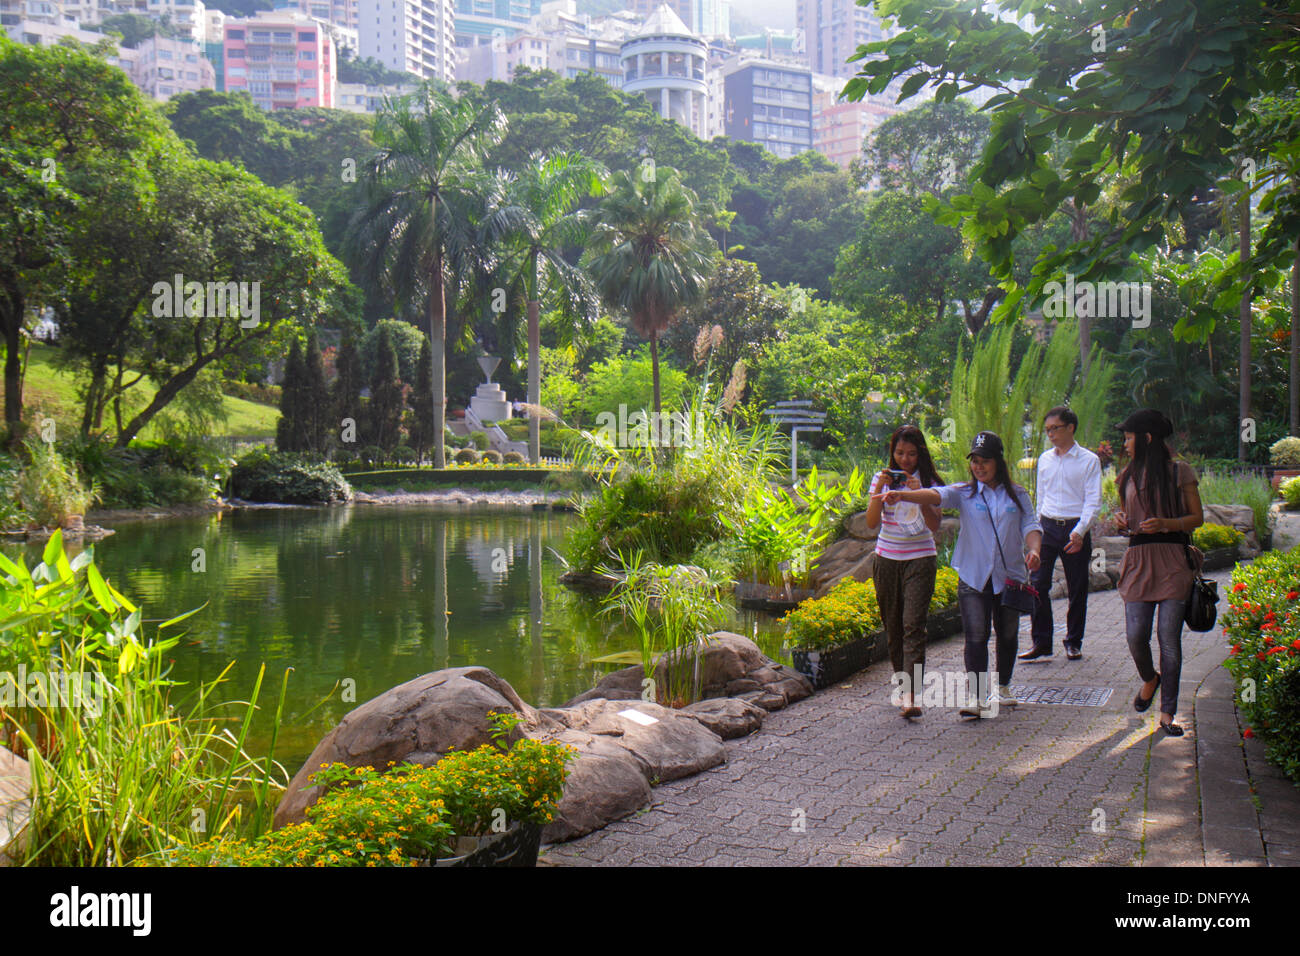 Hong Kong China,HK,Asia,Chinese,Oriental,Island,Central,Hong Kong Park,landscape,trees,pond,Asian adult,adults,woman female women,friends,city skyline Stock Photo